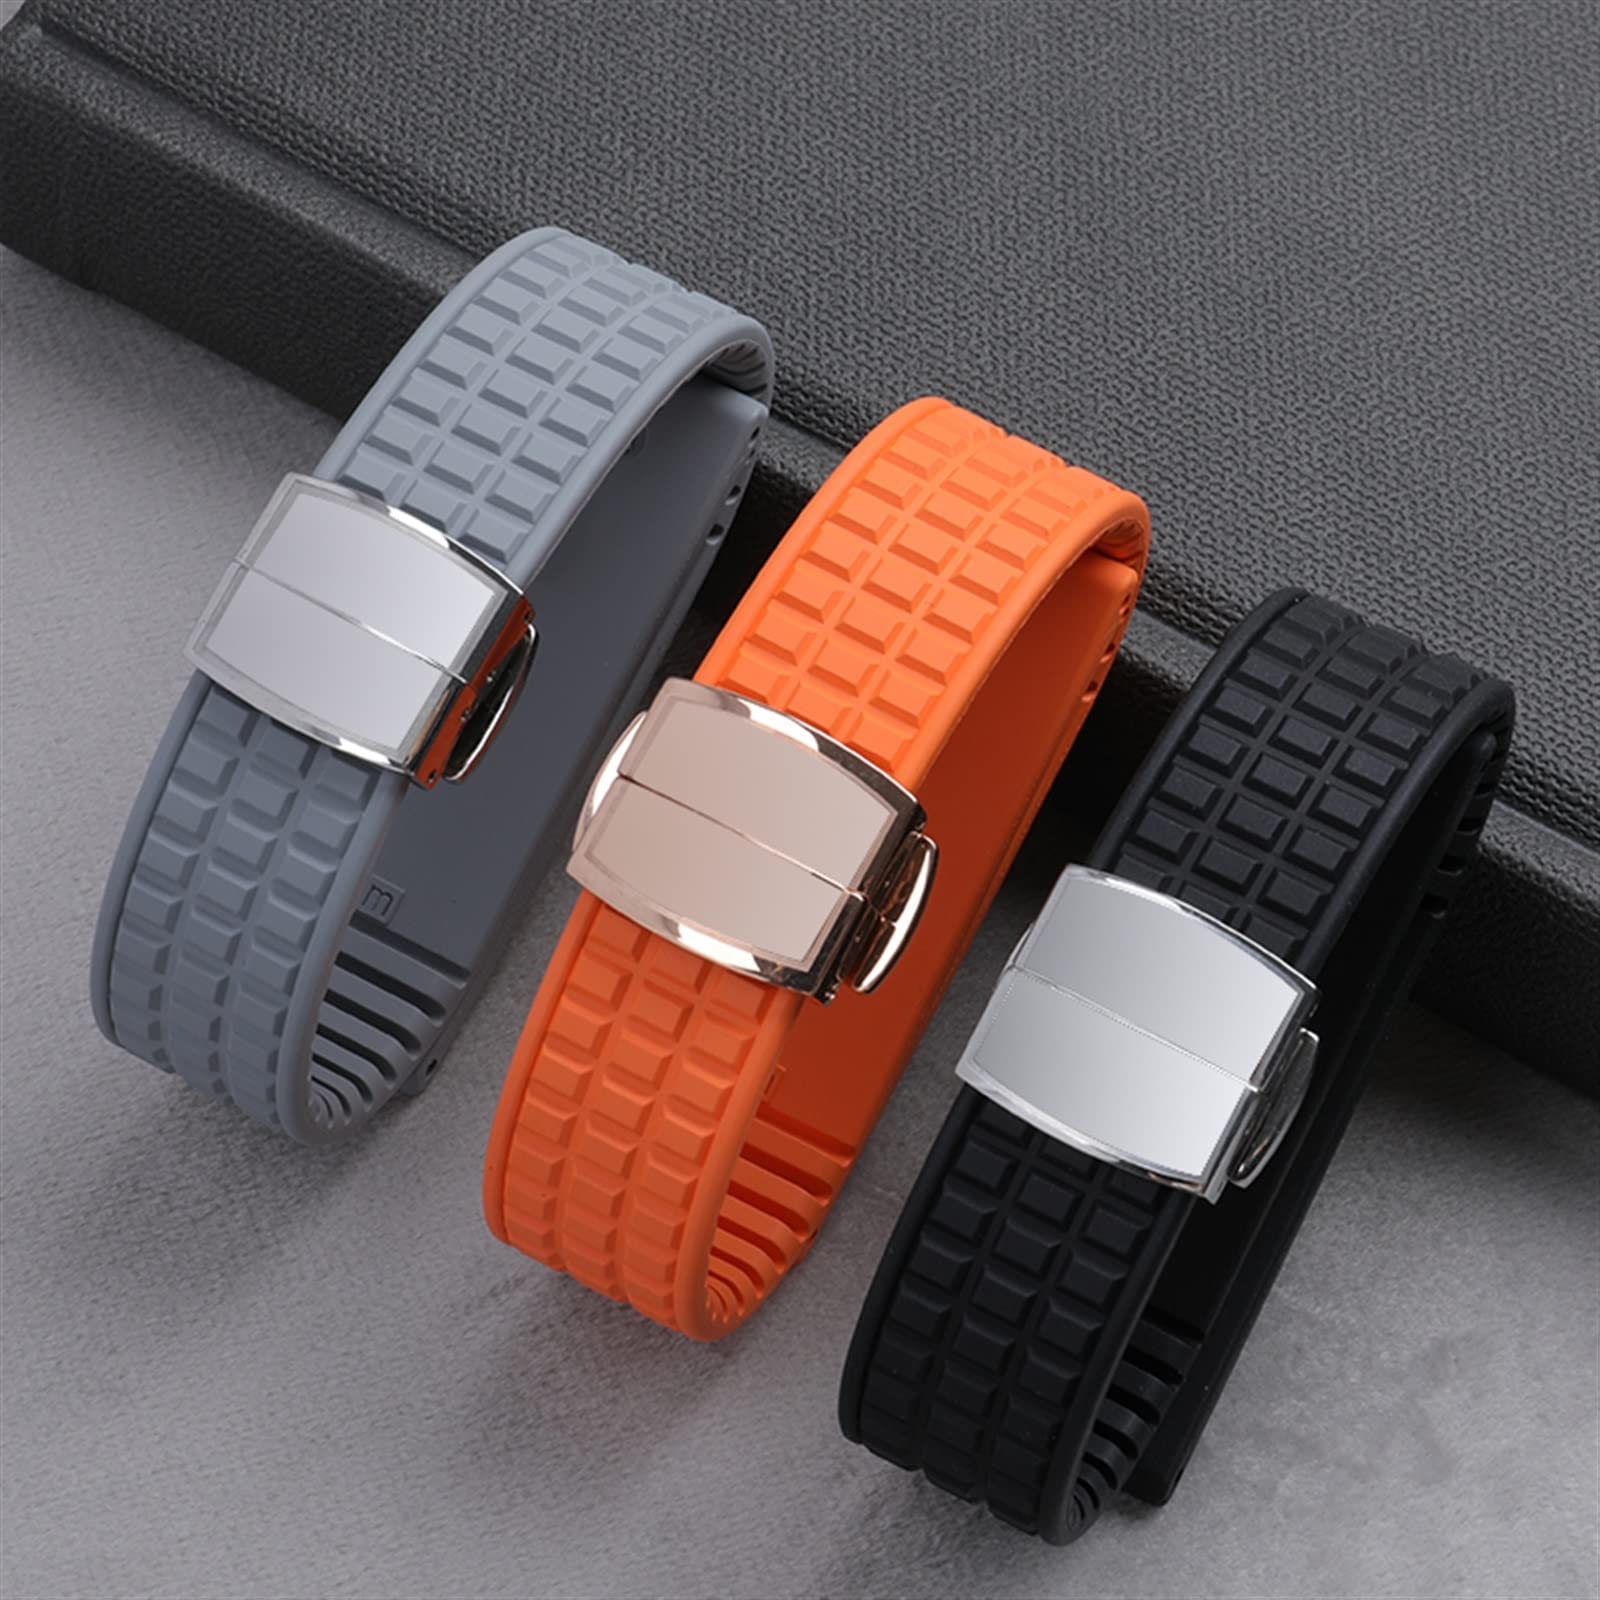 HAODEE Waterproof FKM Fluororubber Rubber Watch Band 18mm 19mm Accessories Replace for Patek Strap for Philippe for Aquanaut 5067A-001 Belt (Color : Orange, Size : 19mm-Silver Buckle)